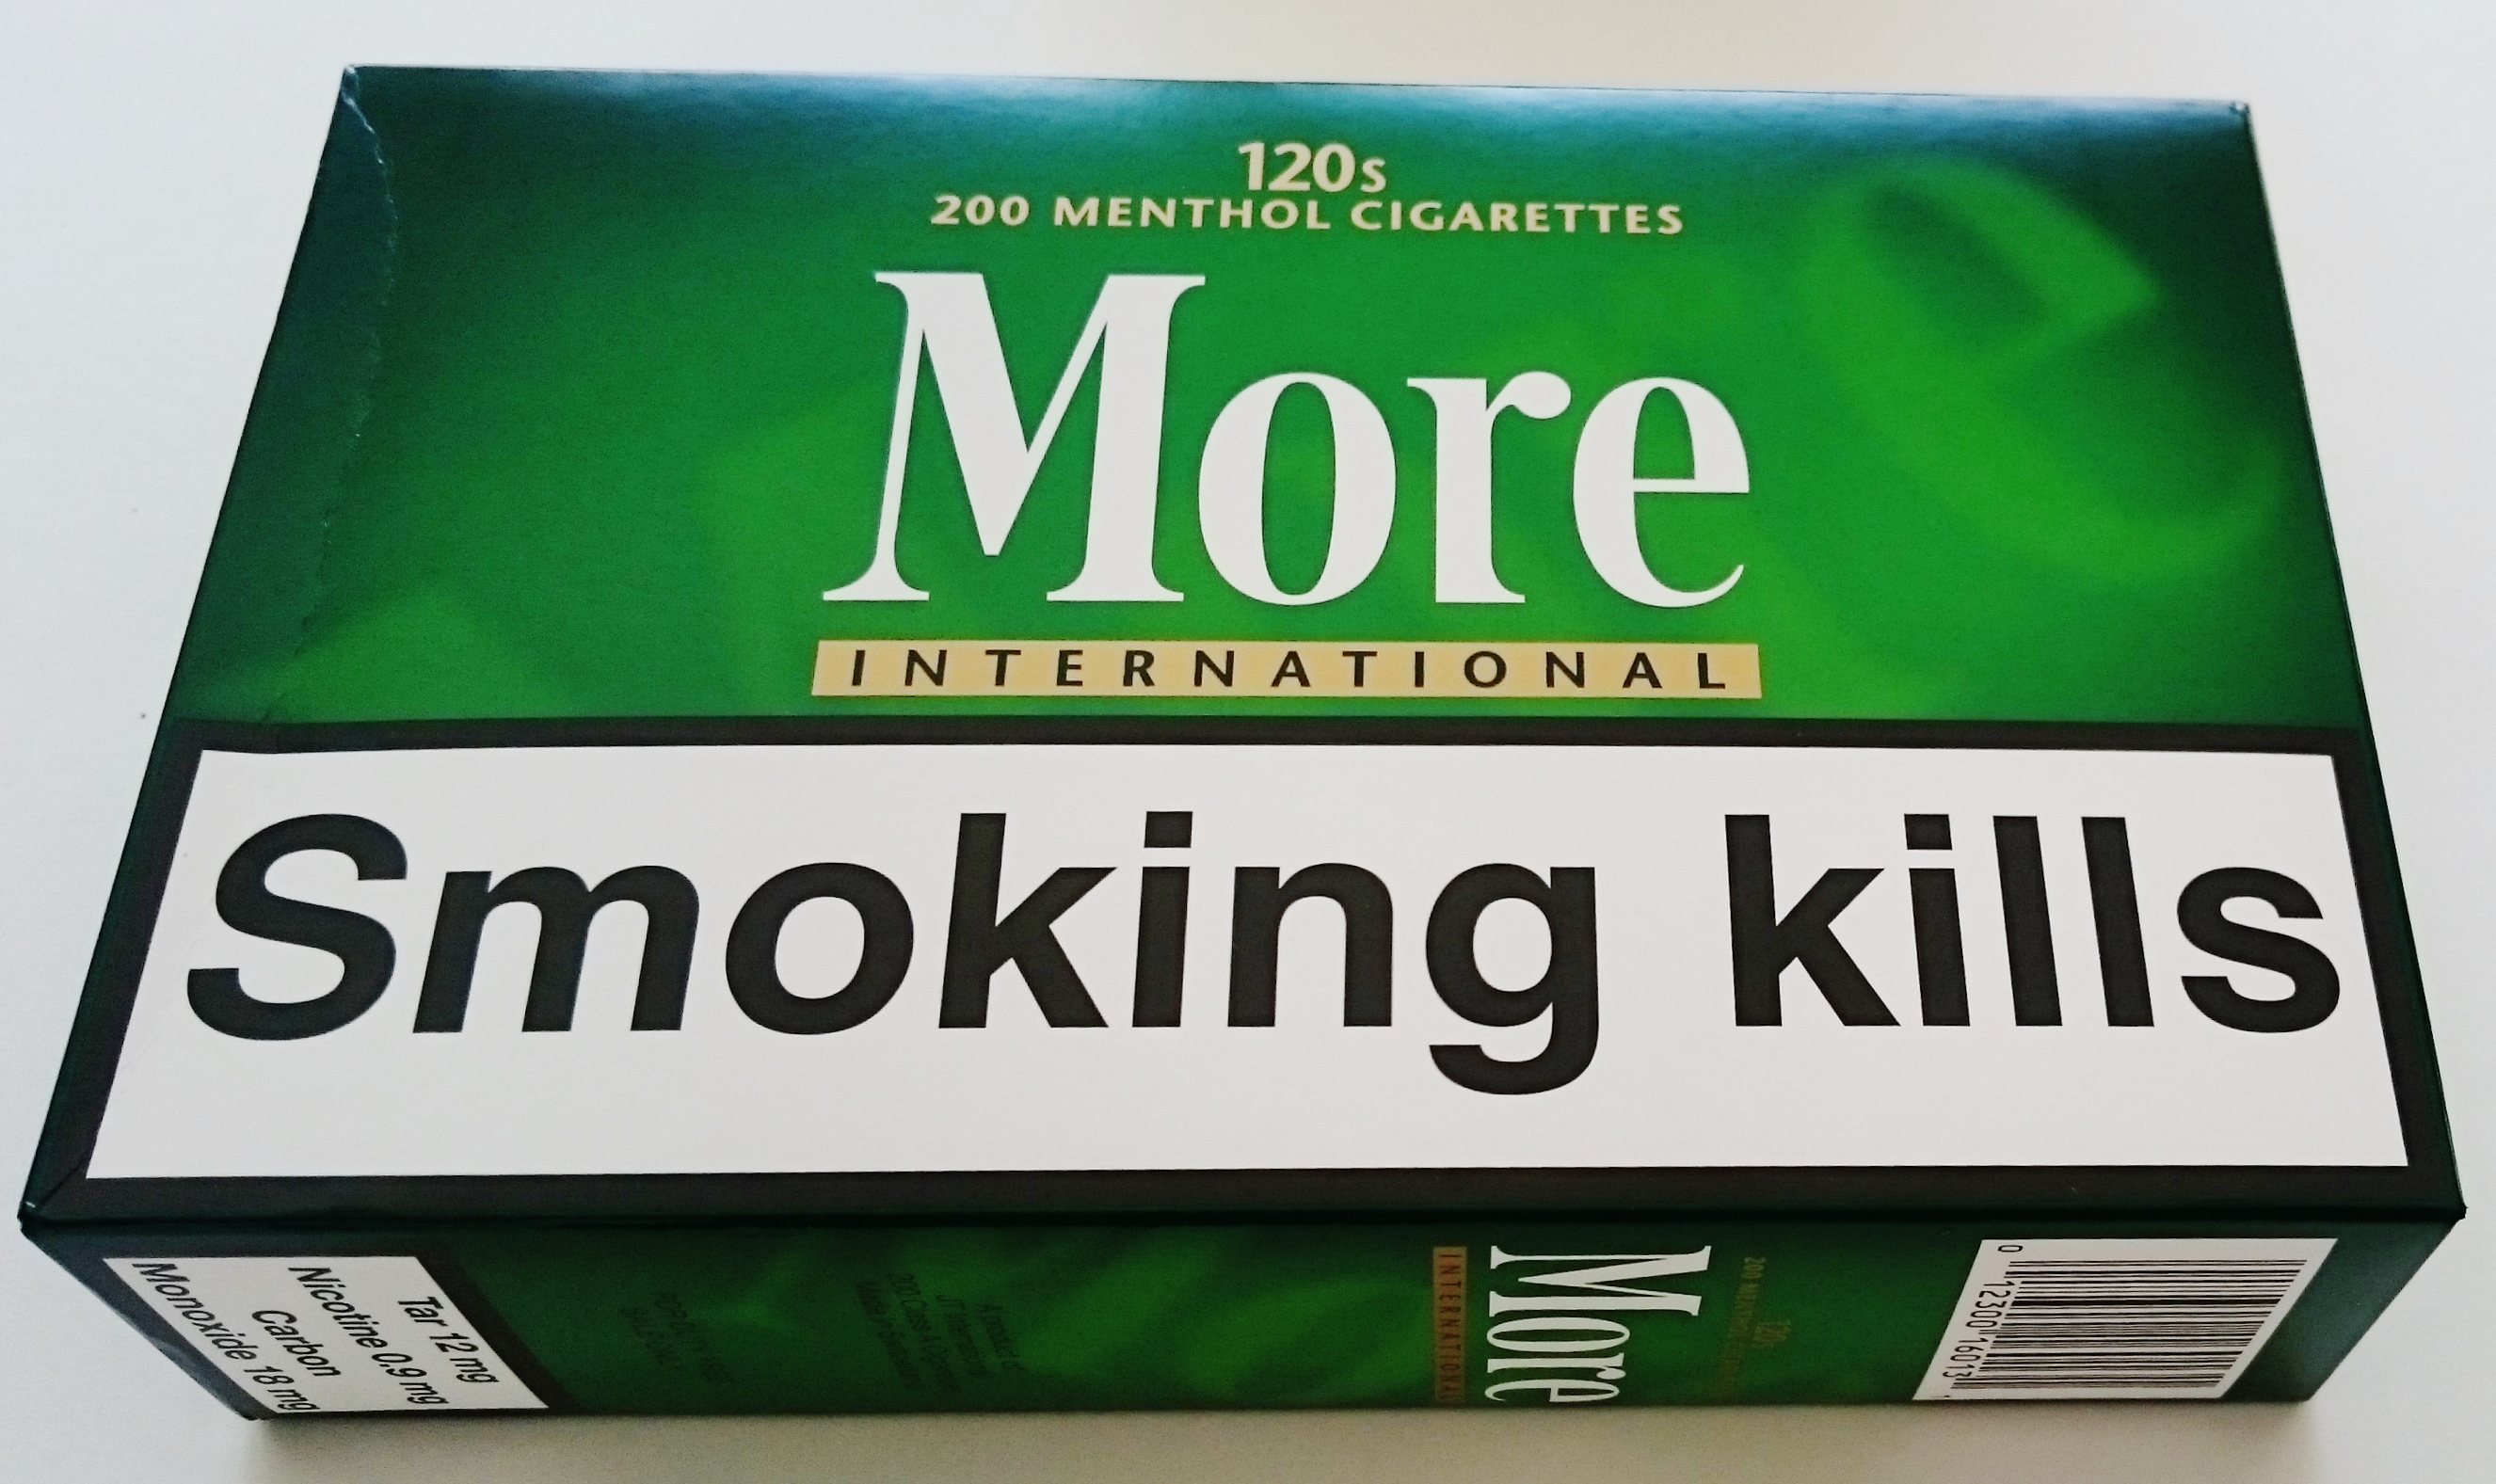 More Menthol cigarettes - Buy cigarettes, cigars, rolling tobacco, pipe tobacco and save money